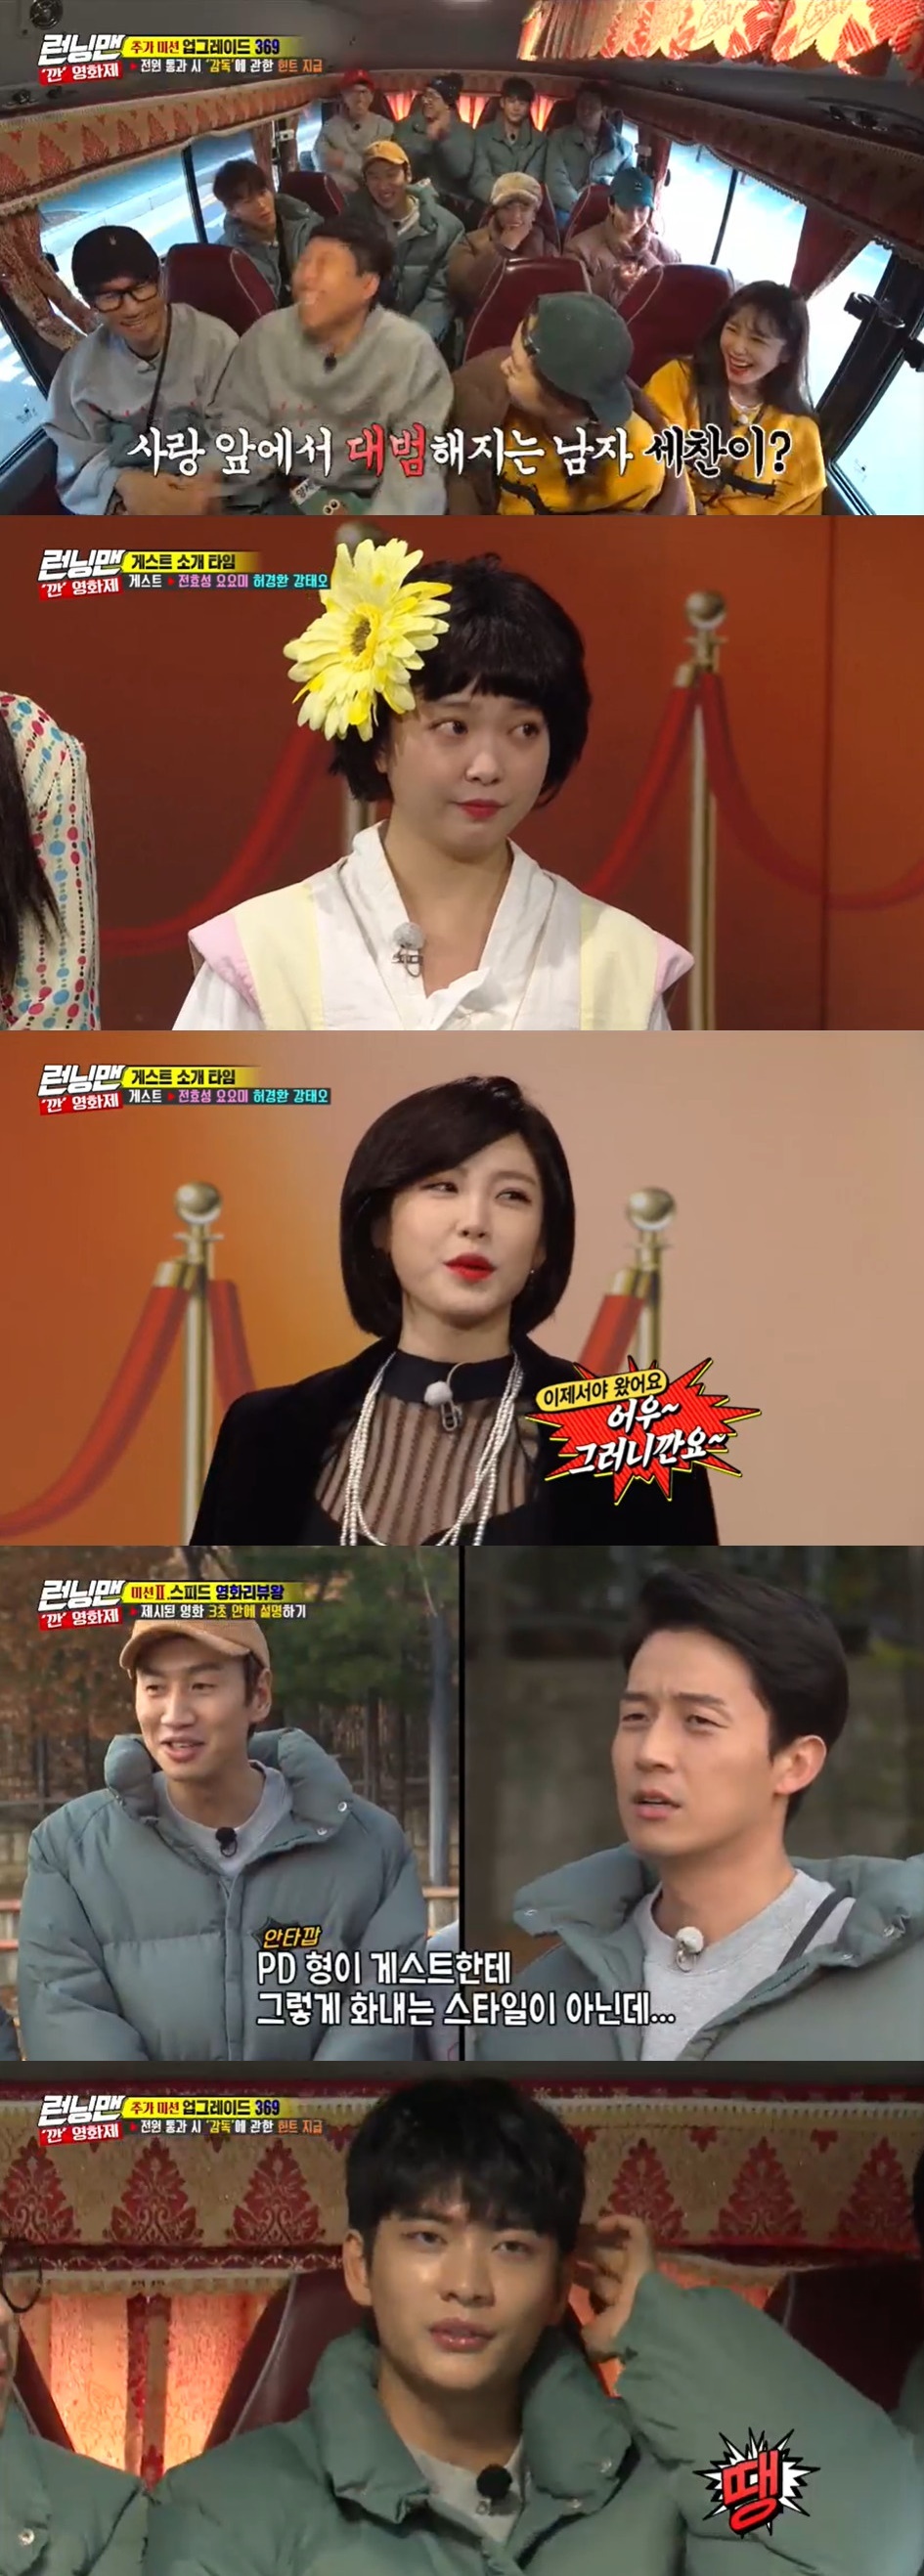 Seoul = = Running Man Yo-Yo ready Jun Hyoseong Kang Tae-oh Heo Kyung-hwan drew laughter with various charms.On SBS Running Man, which was broadcasted at 5 pm on the 29th, members dressed as new Stiller characters in Korean movies were shown to race.On this day, Race was made up of two directors who were not invited to the film festival, searching for a national actor who refused his scenario, taking the name tag, and protecting the rest of the members.As a guest, Yo-Yo already Jun Hyoseong Heo Kyung-hwan Kang Tae-oh appeared.Yo-Yo already, which became a hot topic in the resemblance of Hye Eun Yi, attracted attention by singing Hye Eun Yis 3rd Han River Bridge unaccompanied.In particular, Yoo Jae-Suk praised the beauty during the period, emphasizing that Yo-Yo alreadys actual age is 26 years old.But Ji Suk-jin laughed, interrupting the comment, It looks just like that.Kang Tae-oh, who recently appeared on KBS 2TV Chosun Rocco - Mungdujeon, attracted attention by showing his extraordinary candidness that he did not know the question of Yoo Jae-Suk, Do you realize the increase in popularity after the drama appearance in the recent talk.Kang Tae-oh also showed a smile-filled dancing ability and imprinted a different presence.Jun Hyoseong, who appeared in Running Man for the first time in 11 years of his debut, also attracted attention by dressing up as a taja.But at this time, Haha said, Was it Kim Hye-soo? He said, I thought it was my mothers makeup. Jun Hyoseong said, Please hit the jackpot.The first mission was a quiz that only looked at the small hole and matched the title of the movie.In order to prevent the answer from coming out, the crew made a penalty that fits the night when the wrong answer was accumulated, and the members showed their efforts to save the wrong answer as much as possible.In particular, Yang Se-chan and Lee Kwang-soo hit each other at night and formed a rivalry to add fun.Jun Hyoseong said, How do you give and receive this? It is amazing.In the last question of the movie, Kang Tae-ohs performance allowed Lee Kwang-soo to answer the correct answer, and Lee Kwang-soo finally got a revenge on Yang Se-chan.Then Lee Kwang-soo asked the production team, This is the last game, and suddenly he called Kim Jong-kook as the last perfect penalty and laughed.However, the final first mission victory was won by Yang Se-chan Haha Jeon So-min Kim Jong-kook team.Kim Jong-kook team got a hint that hidden coaches were one man and one woman.Since then, the members have continued to talk to infer two directors on the moving bus.In the meantime, a mission to get additional hints was carried out on the bus.The additional mission game was an upgrade 3.6.9 game, and when passing the power, a hint of supervision was paid.At this time, each member made a mistake, and they were suspicious of each other as a director, and only tension was created, but the hint was not finally obtained.At the second mission site where I arrived with a curiosity about the director, Yoo Jae-Suk laughed, saying, Heo Kyung-hwan is a warning, there is nothing too much.Heo Kyung-hwan tried to give a smile again and try to give strength, but the atmosphere continued to cool down and create a bitterness.